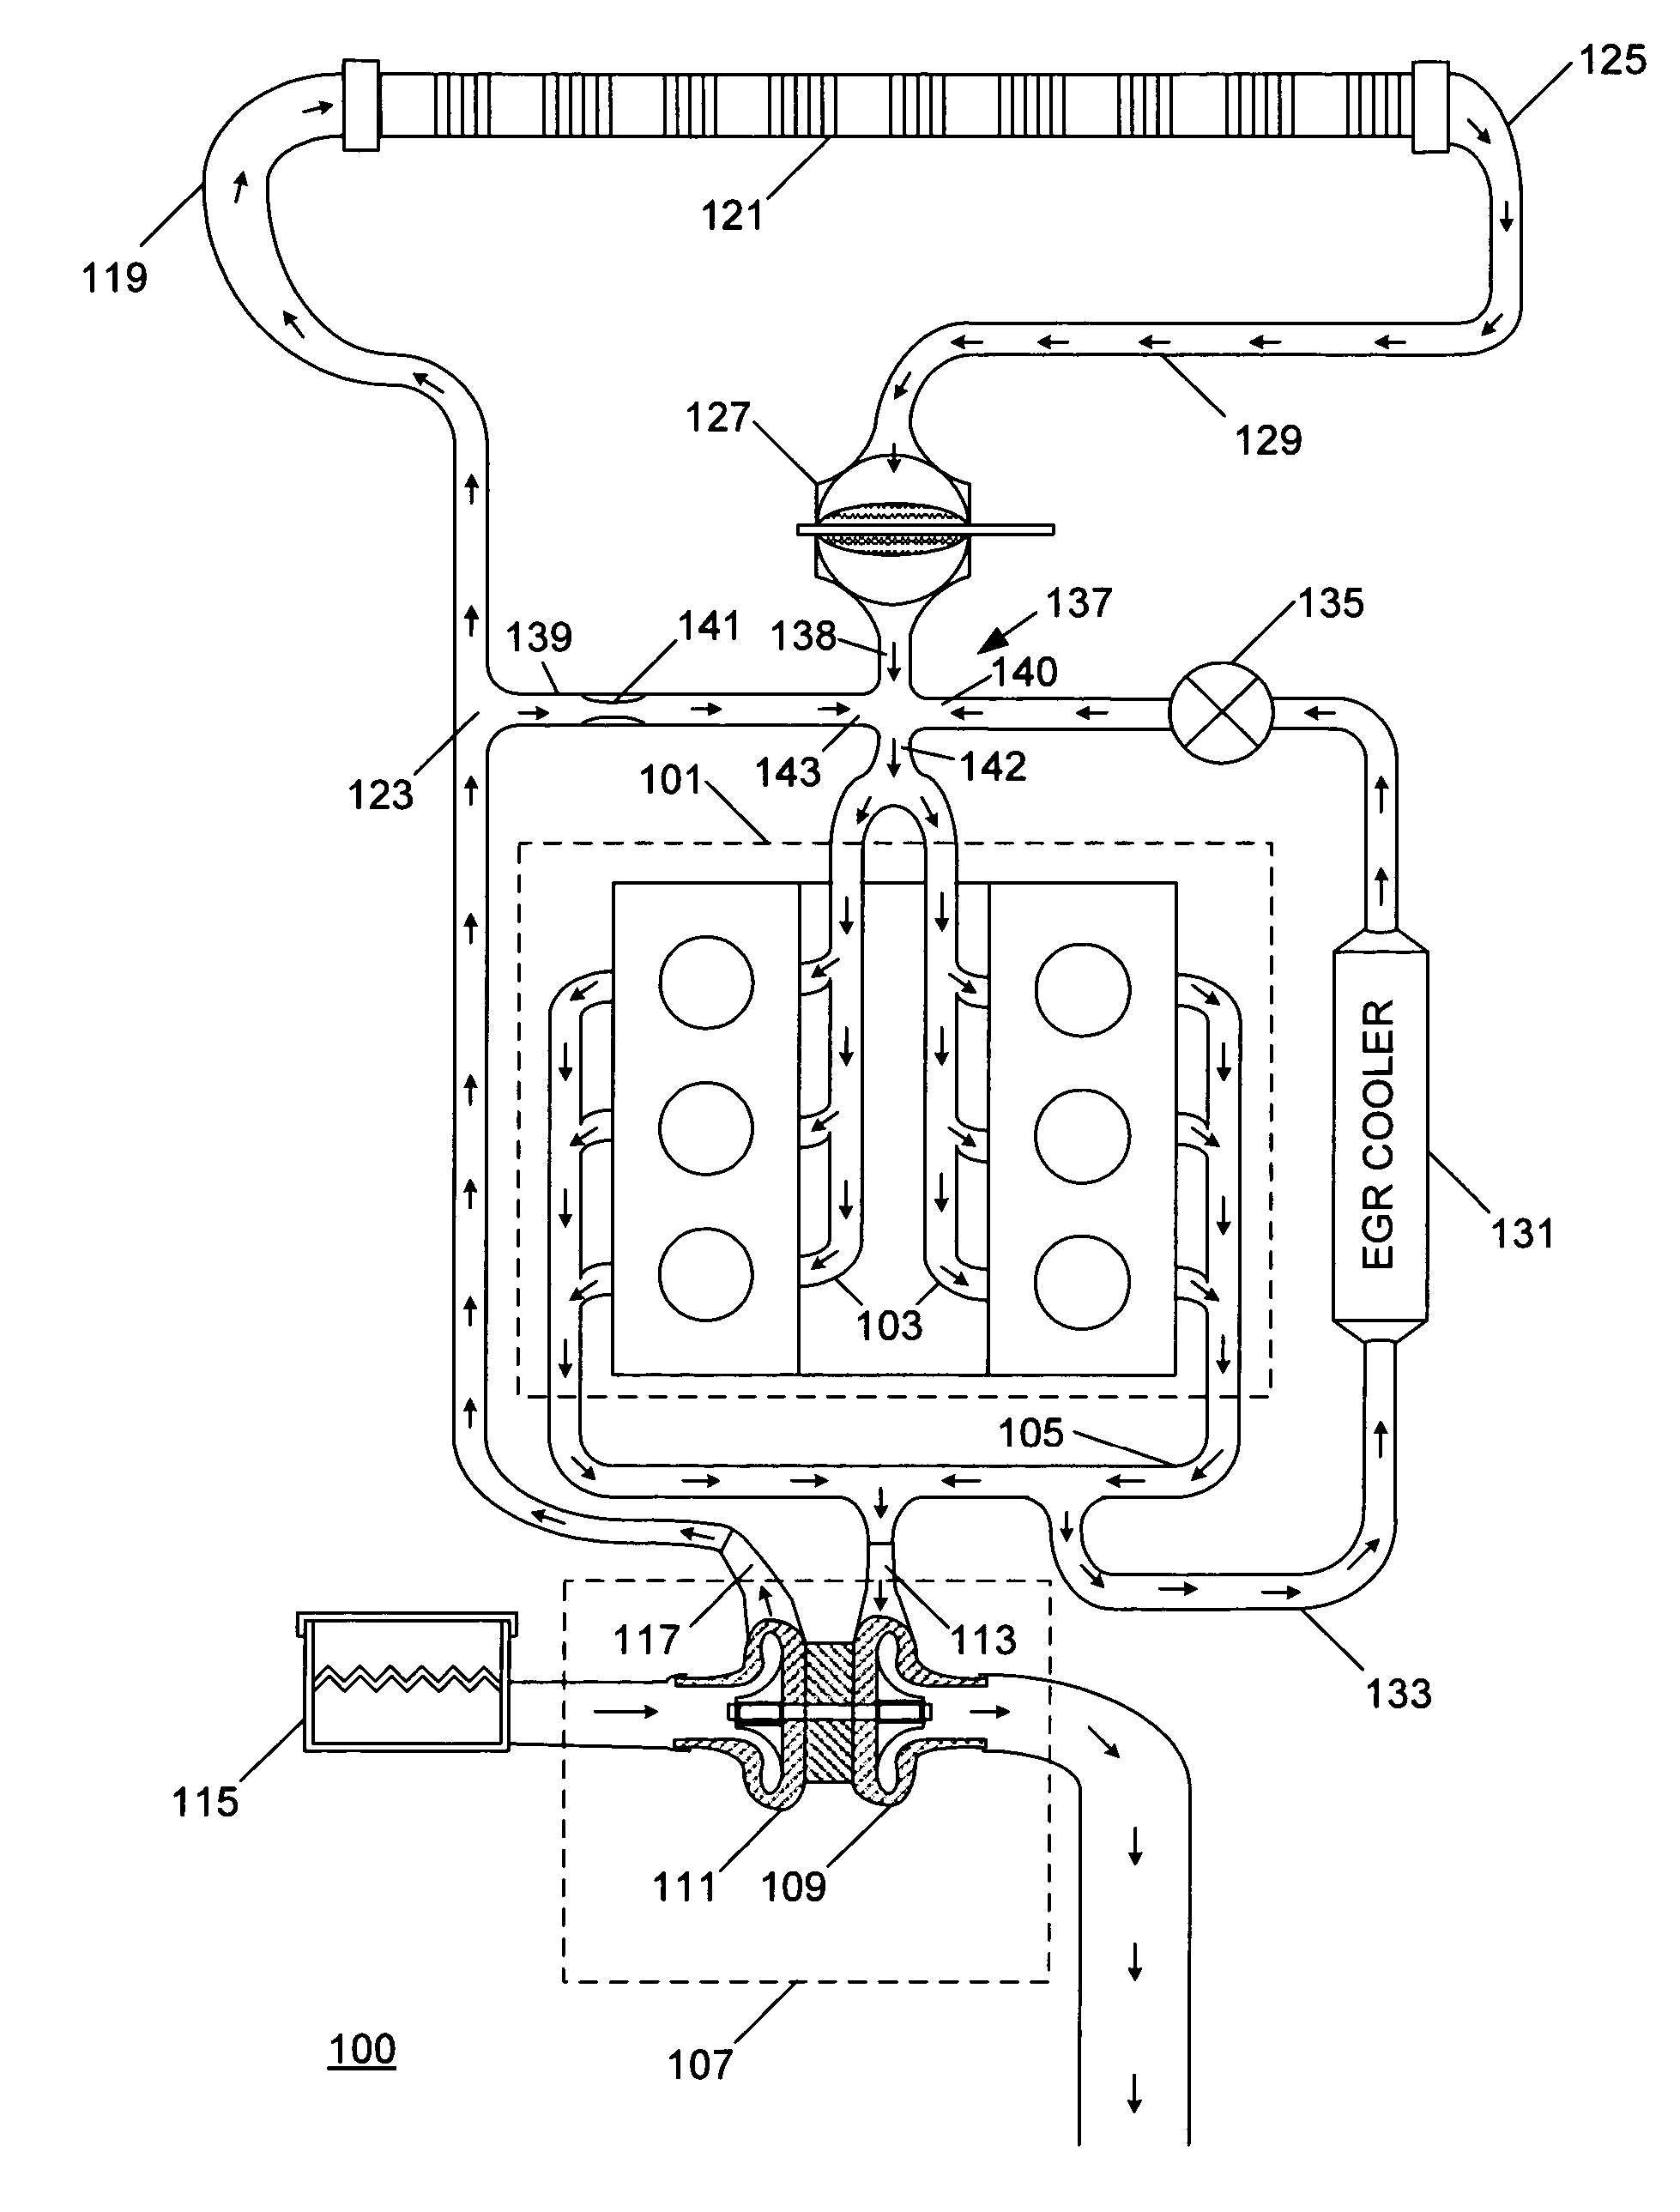 Diesel engine charge air cooler bypass passage and method